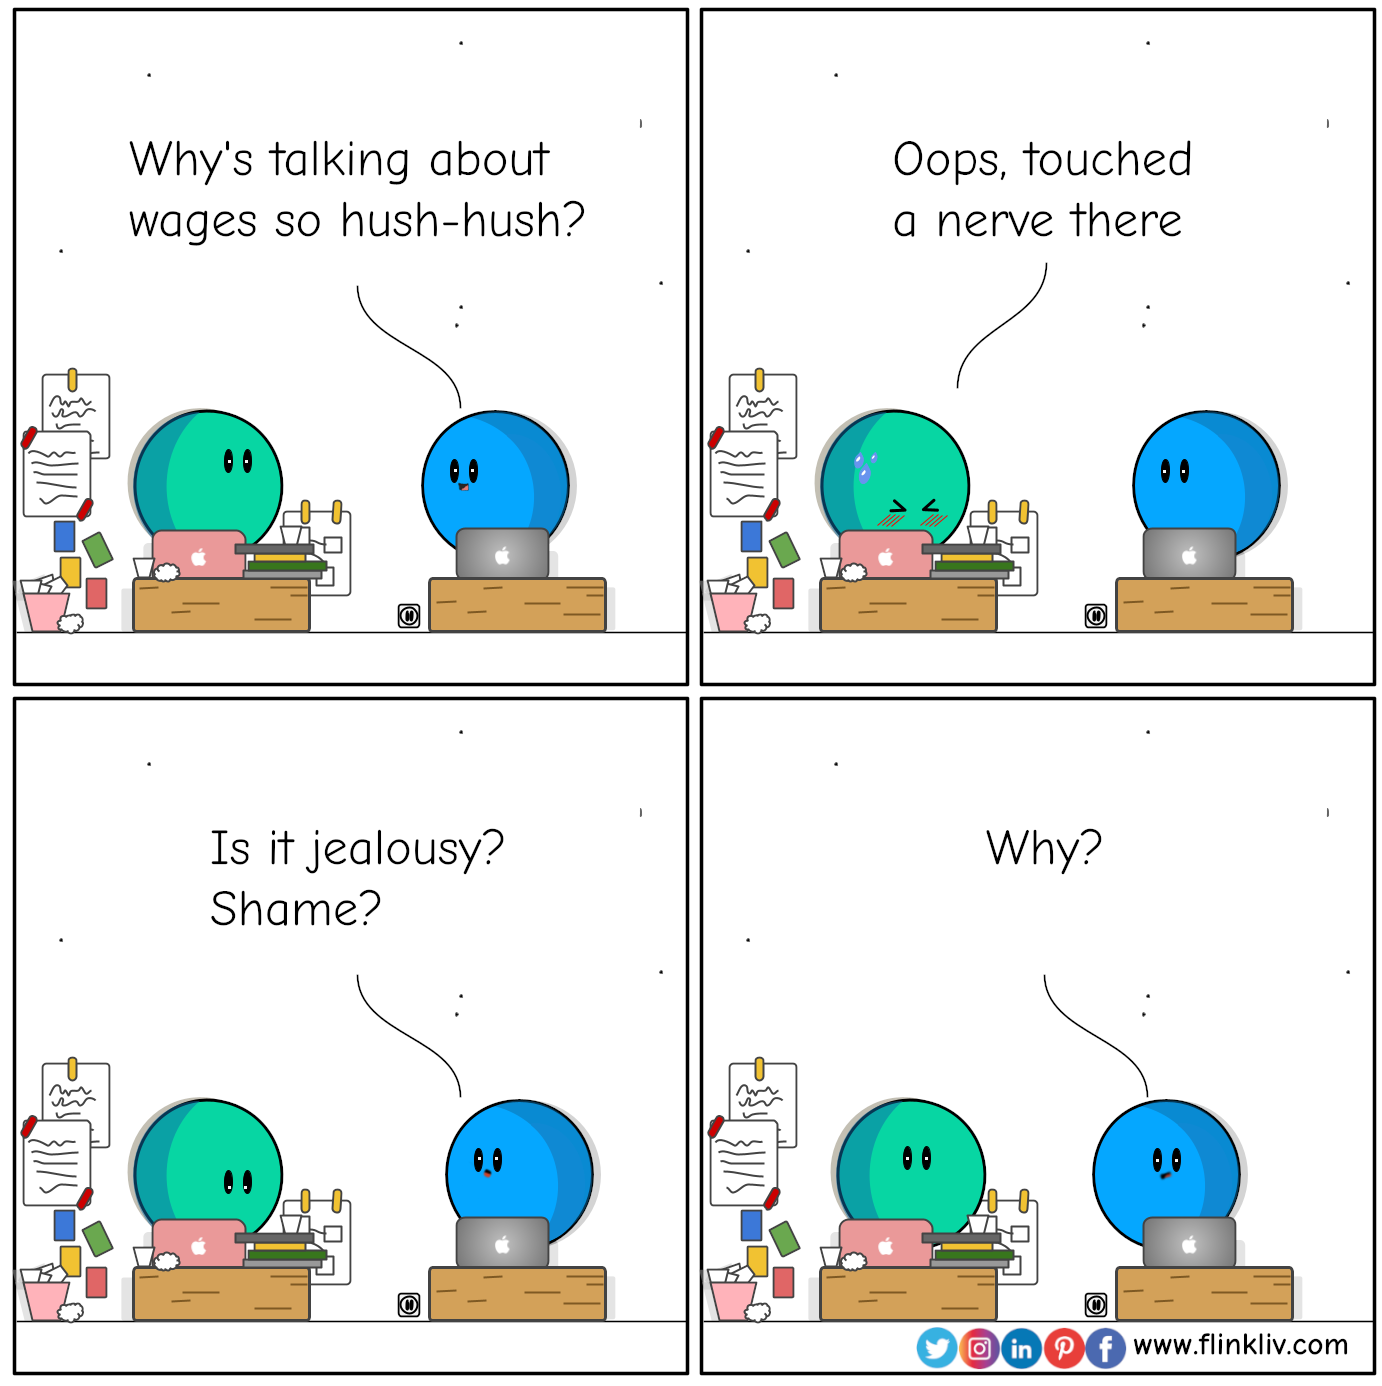 Conversation between A and B about wages in workplace. 
				B: Why's talking about wages so hush-hush?
				A: Oops, touched a nerve there
				B: Is it jealousy? Shame? 
				B: Why?
				By flinkliv.com

            